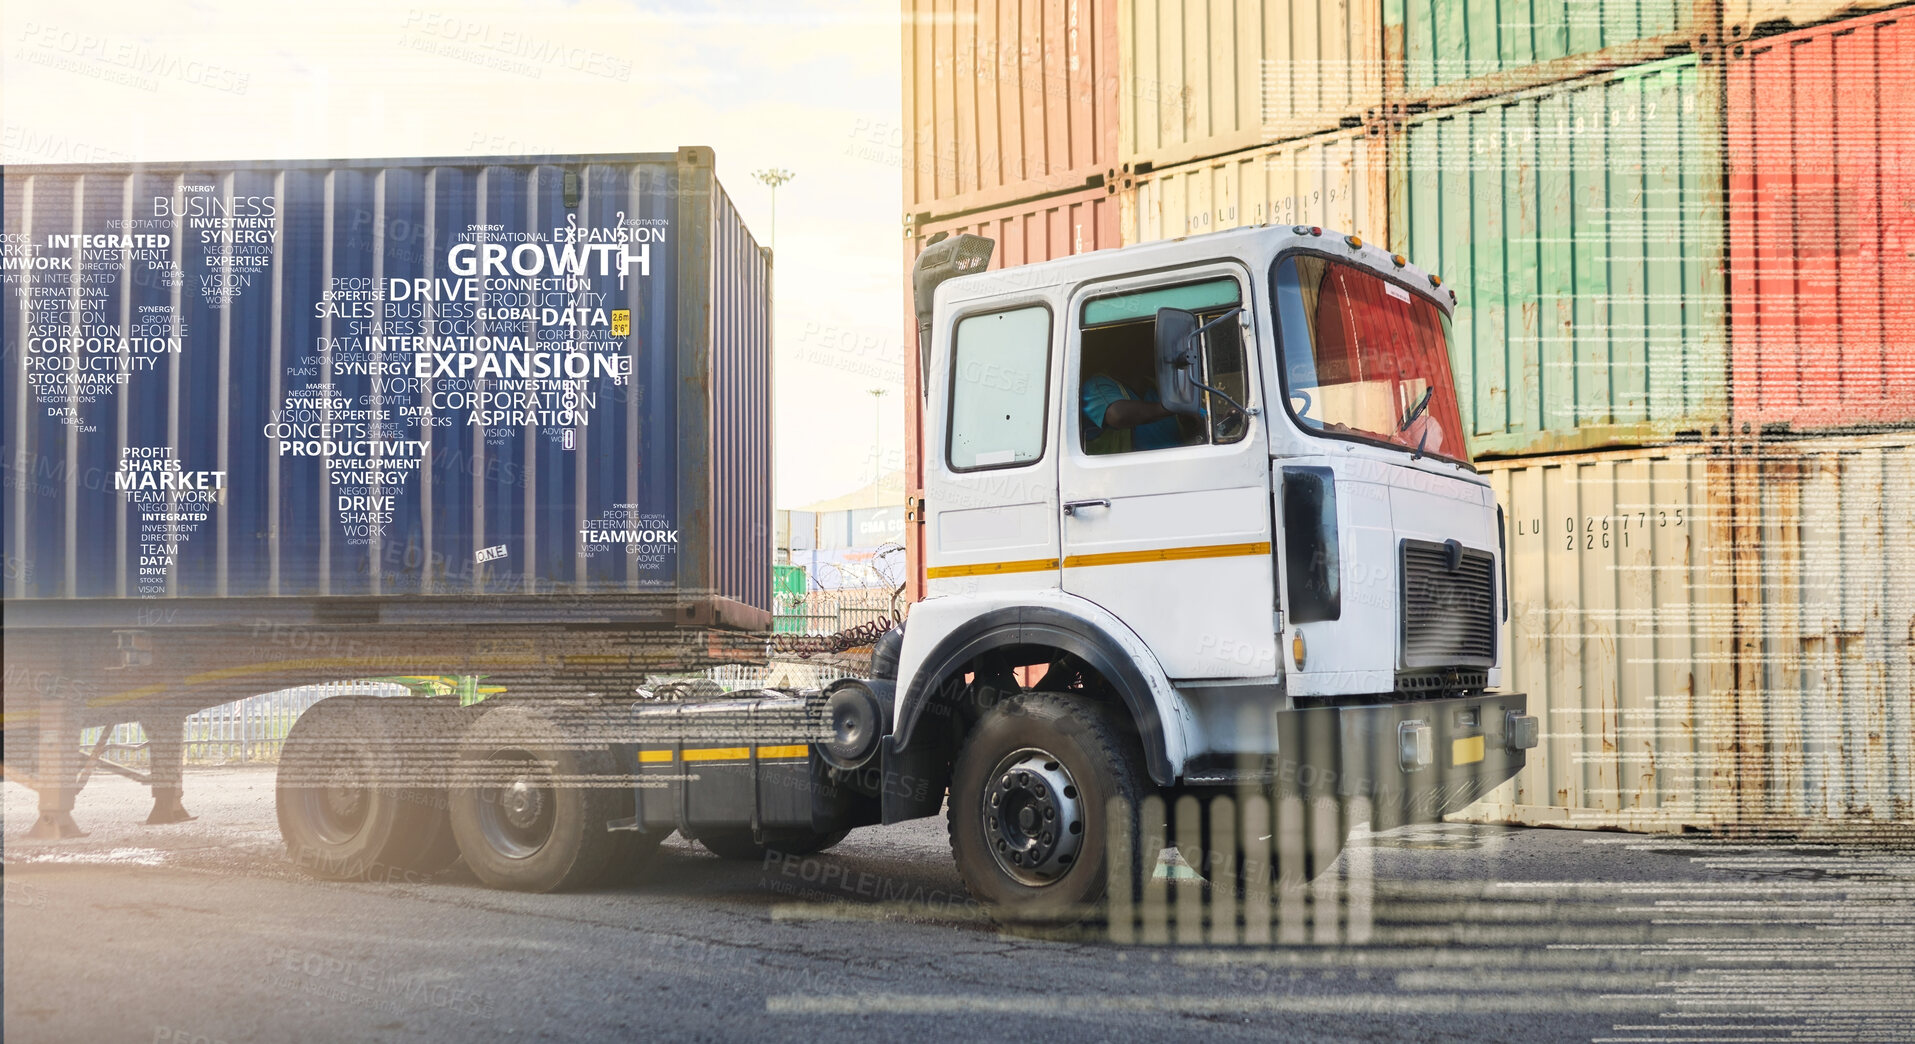 Buy stock photo Logistics, construction truck with hologram and container shipping, moving or distribution for supply chain. Digital innovation, graphic text or transport with heavy duty vehicle for import or export